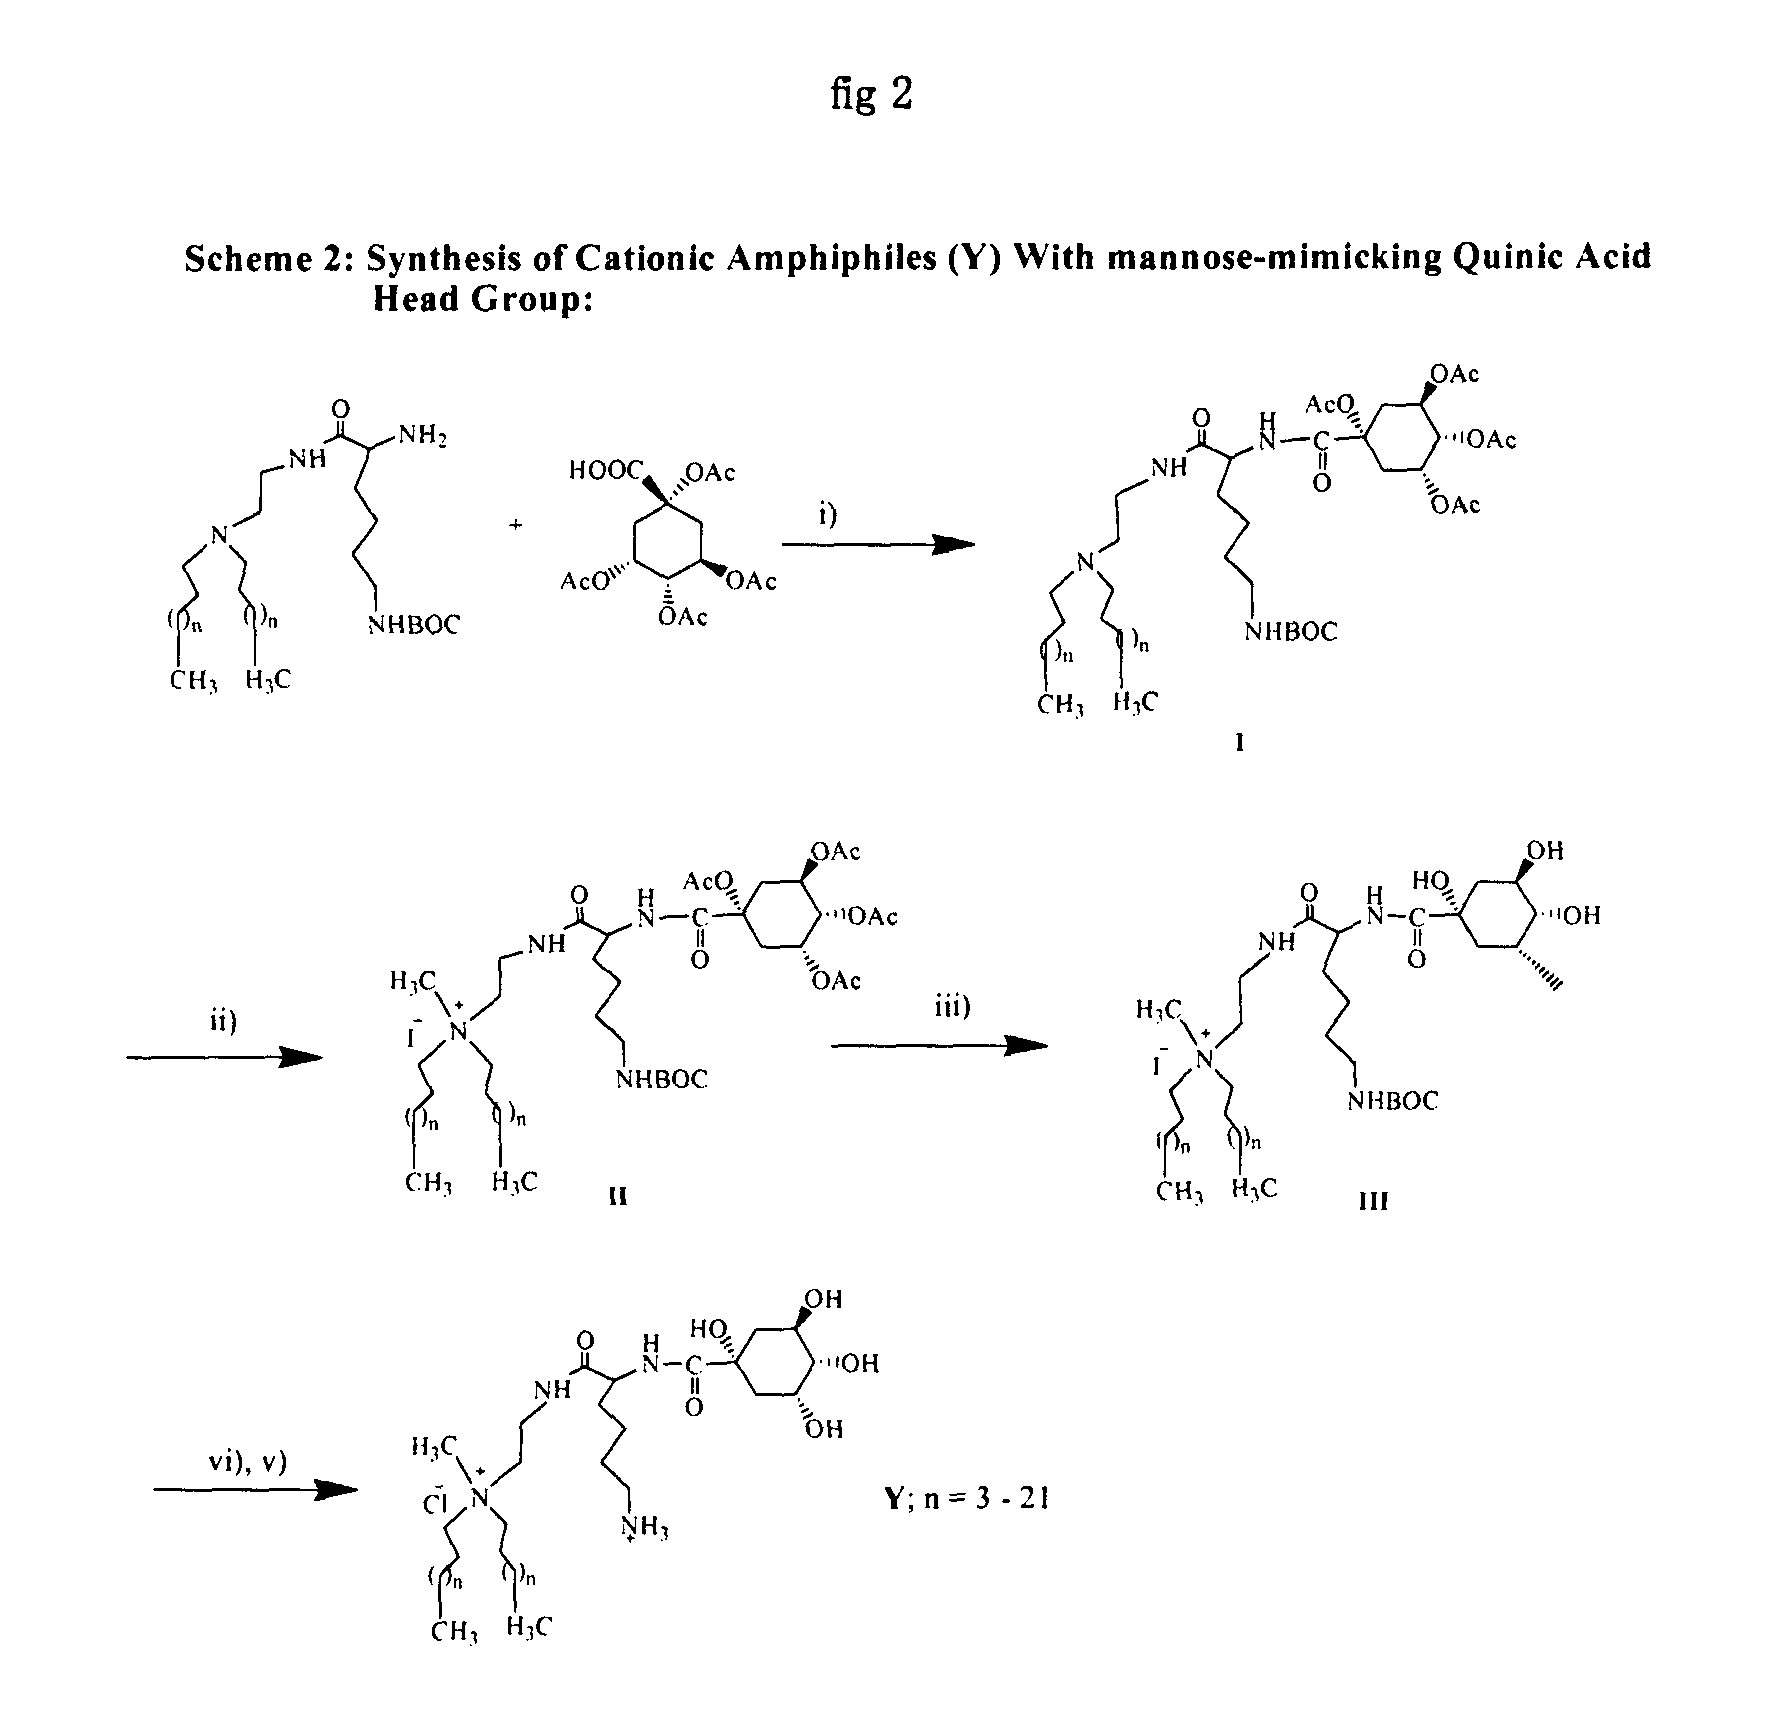 Cationic amphiphiles with mannose-mimicking head-groups and a process for the preparation thereof